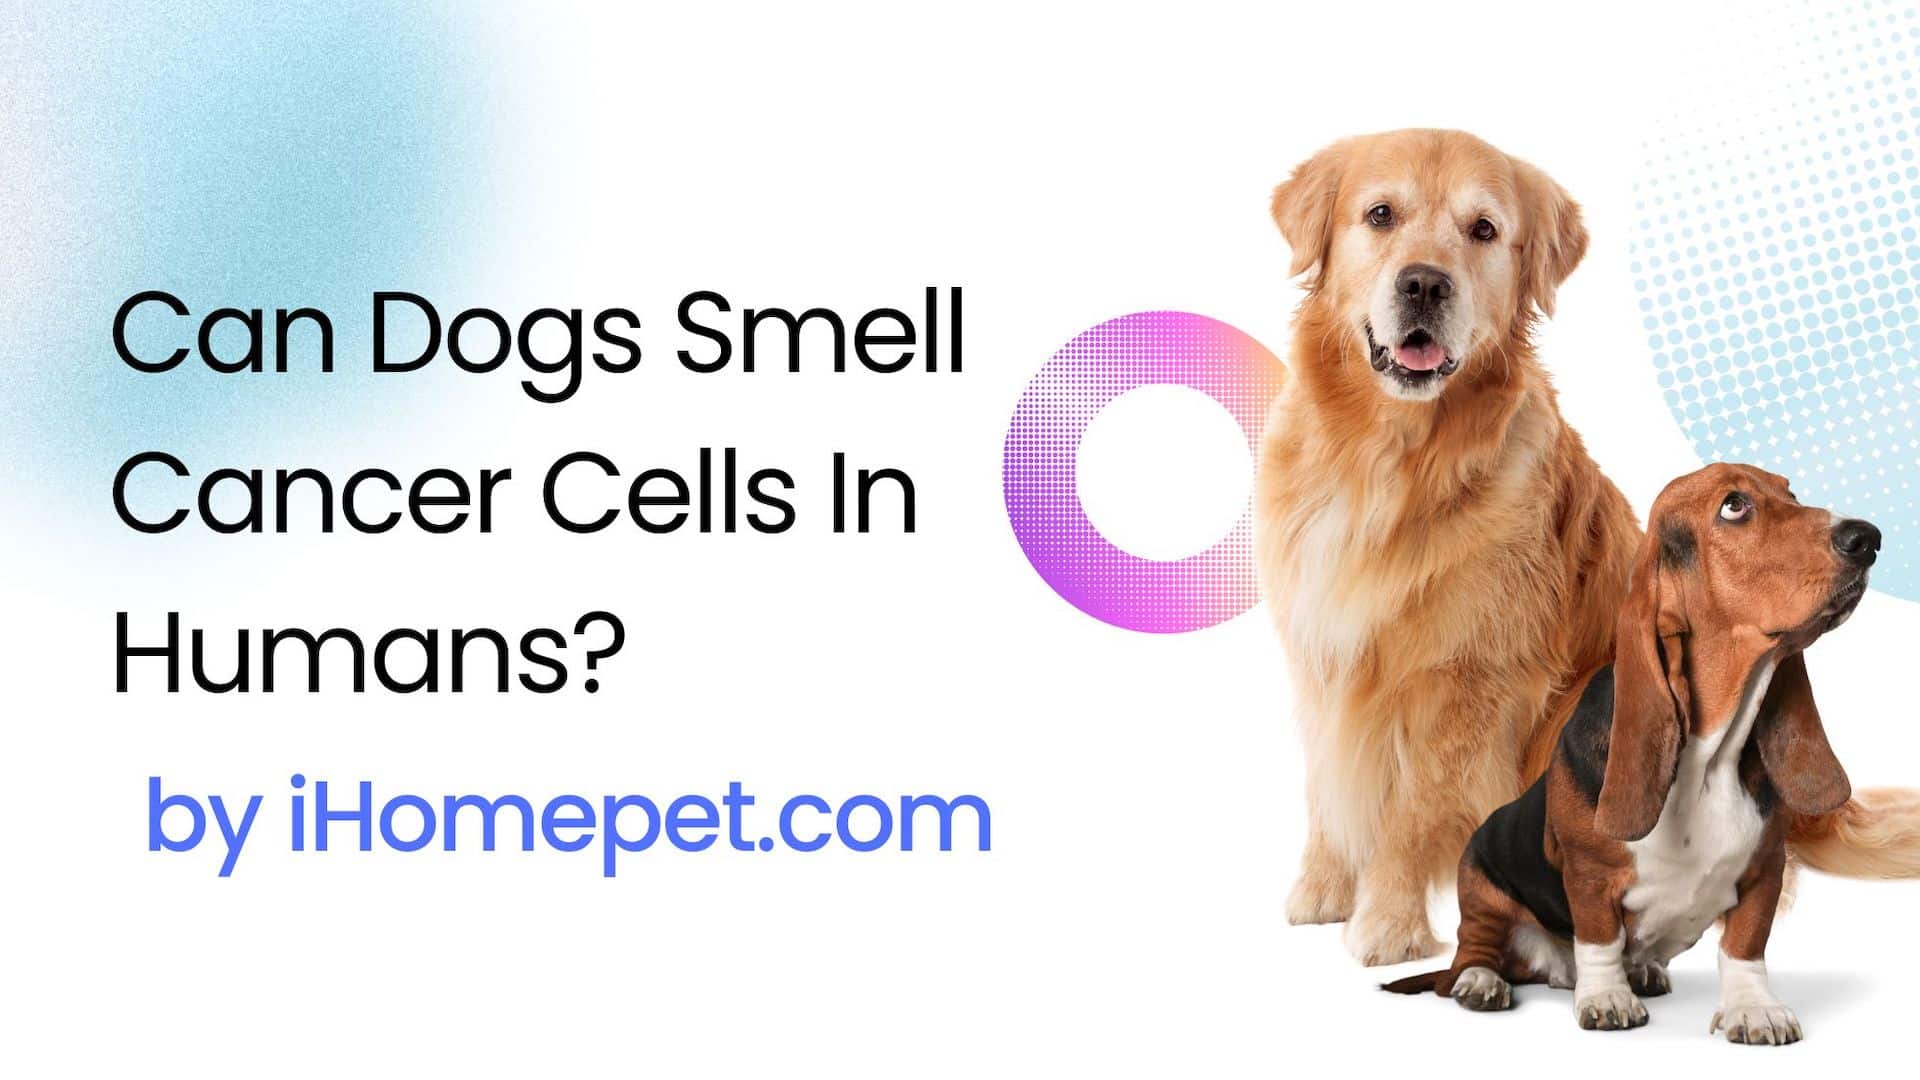 Can Dogs Smell Cancer Cells In Humans